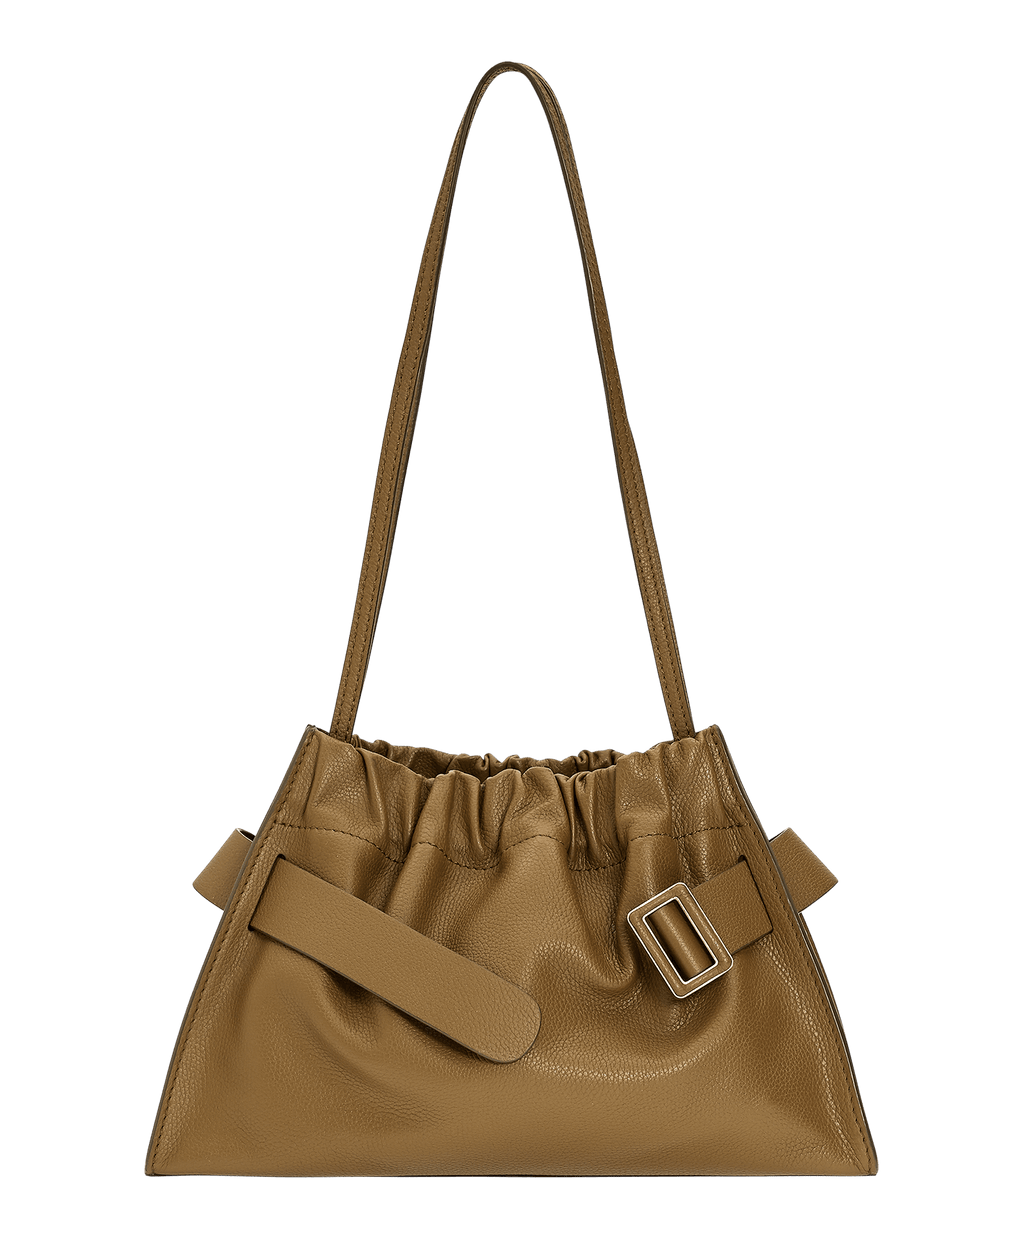 Medium, natural grain rectangular brown leather pouch with a metal and leather buckle, a leather belt, and a shoulder strap.